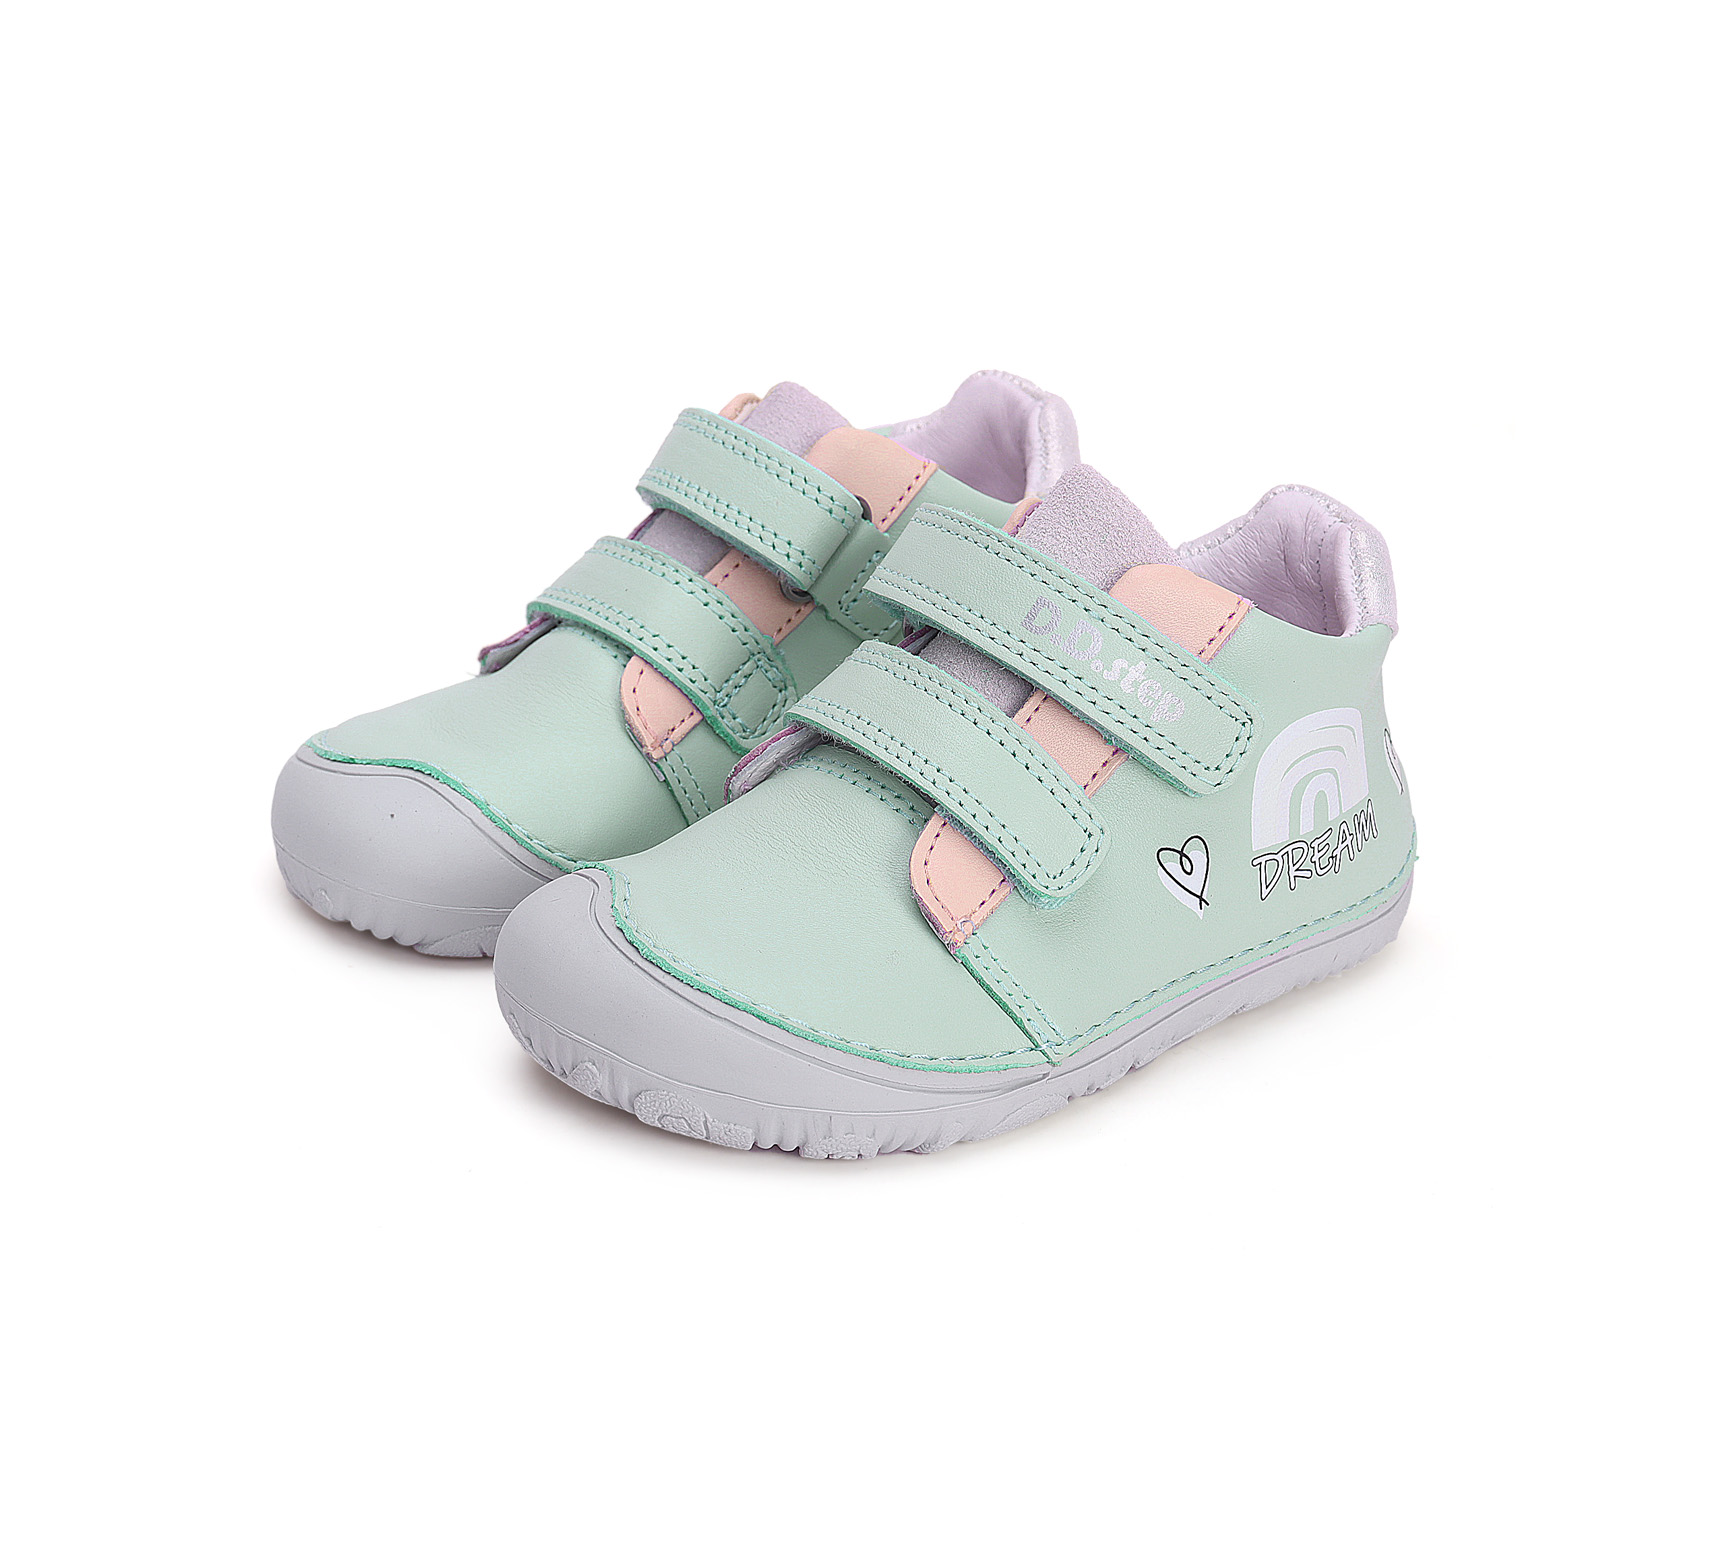 chaussures barefoot cuir DD Step S073-41578 sea green sur la boutique Liberty Pieds-1 (6)